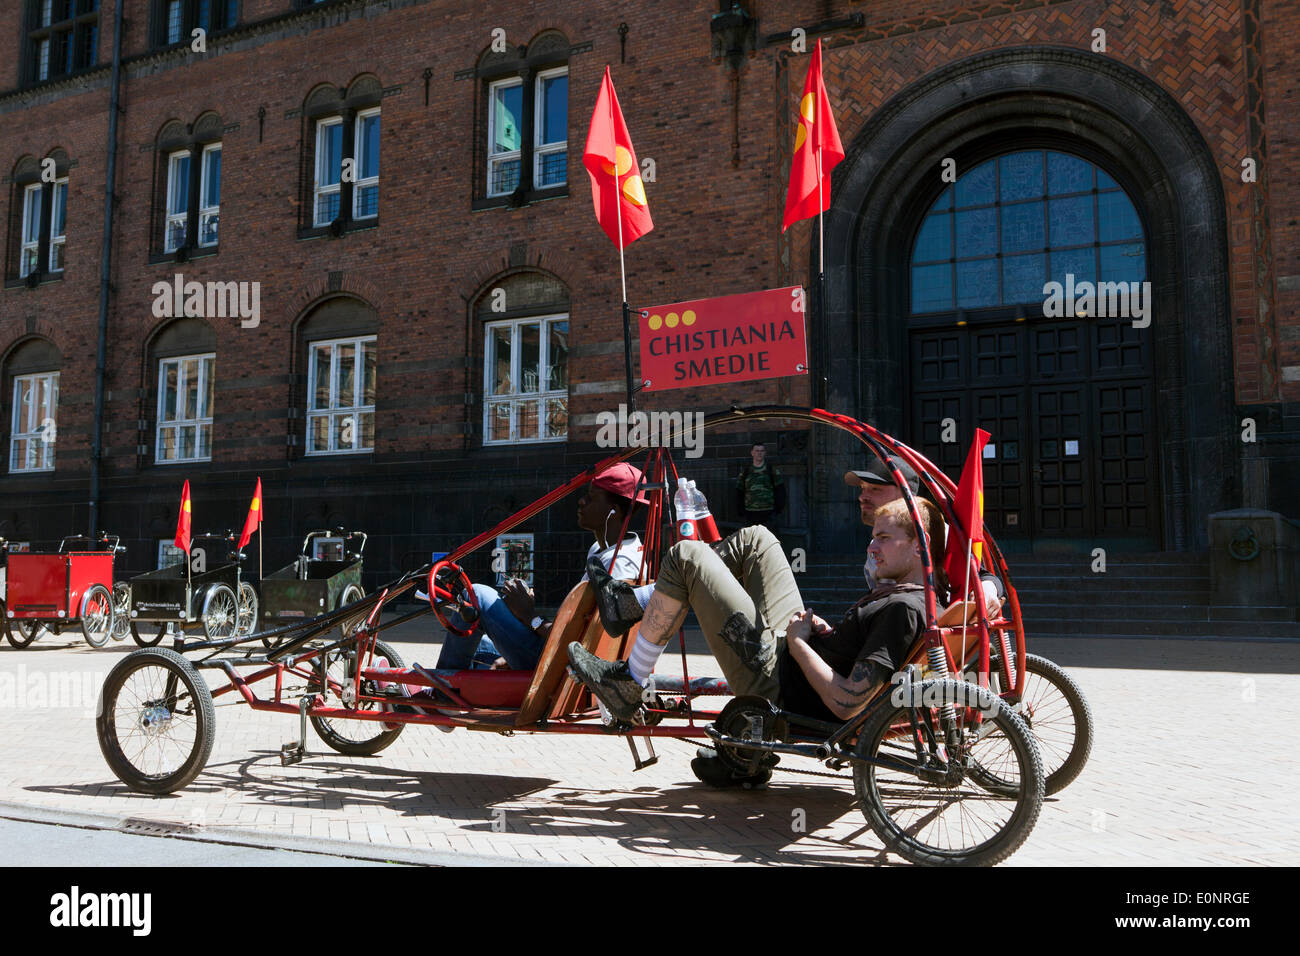 Copenhagen, Denmark. 17th May 2014. Christiania – the free town for alternative life in the middle of Copenhagen – celebrates their very own bikes 30 years anniversary, the special 3 wheeled freight bicycle, with a colorful parade through Copenhagen, staring at the town hall square and  gathering more than 200 bikes. The bikes are designed and produced in Christiania’s own workshop. The “Christiania Bike”, an icon for the free town, is an integrated part of the Copenhagen townscape.  The bike on the photo is an alternative version, called the “Bike Mobil”. Credit:  OJPHOTOS/Alamy Live News Stock Photo